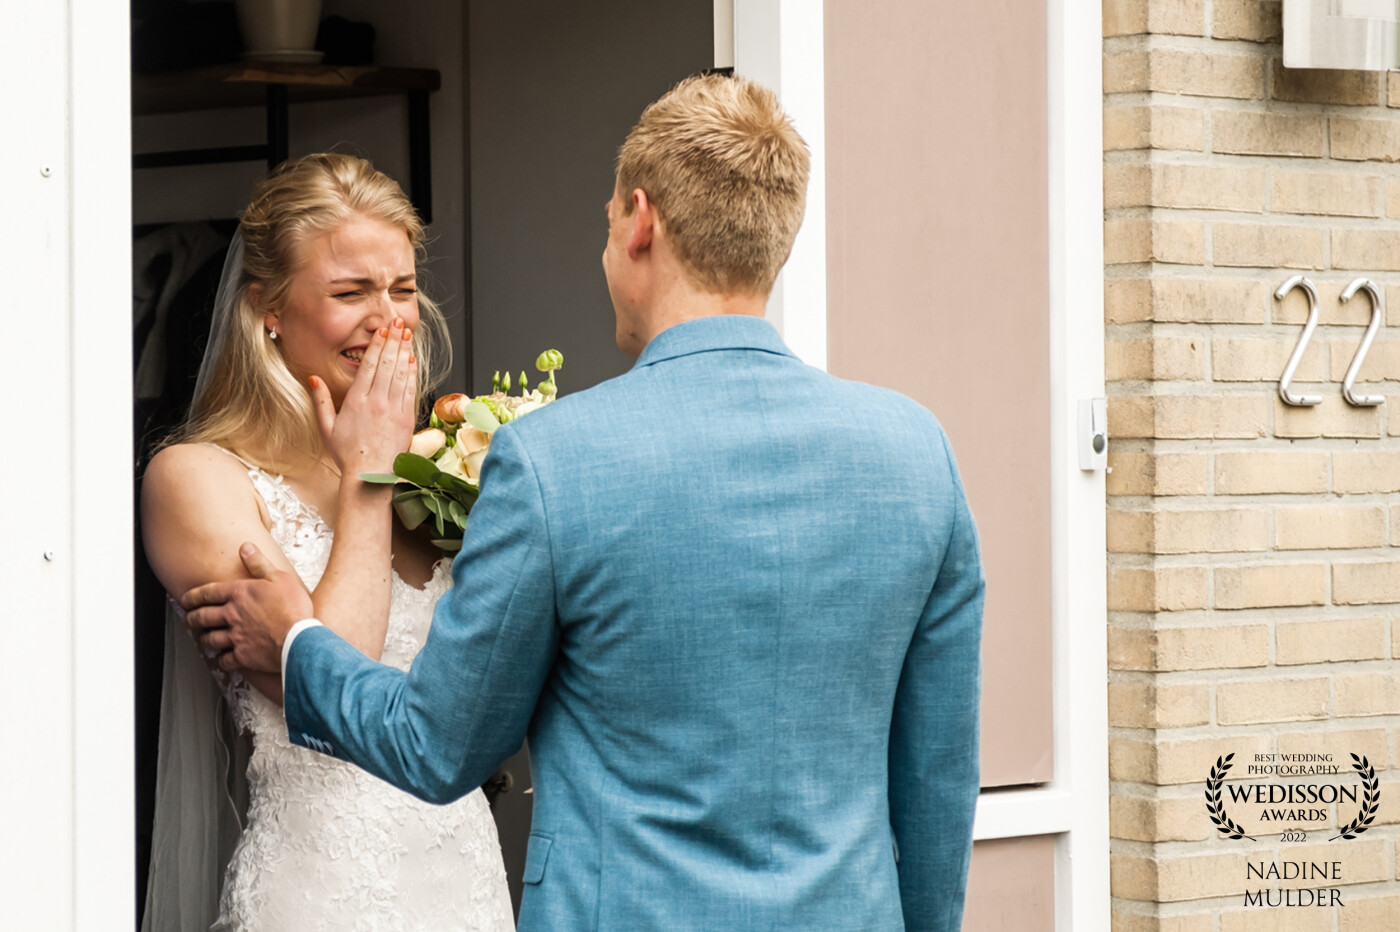 This photo was taken seconds after opening the door and having their very own first look moment! It was such an emotional en beautiful moment.  I could feel the nerves of the bride change into relieve to finally see and hold her husband to be.